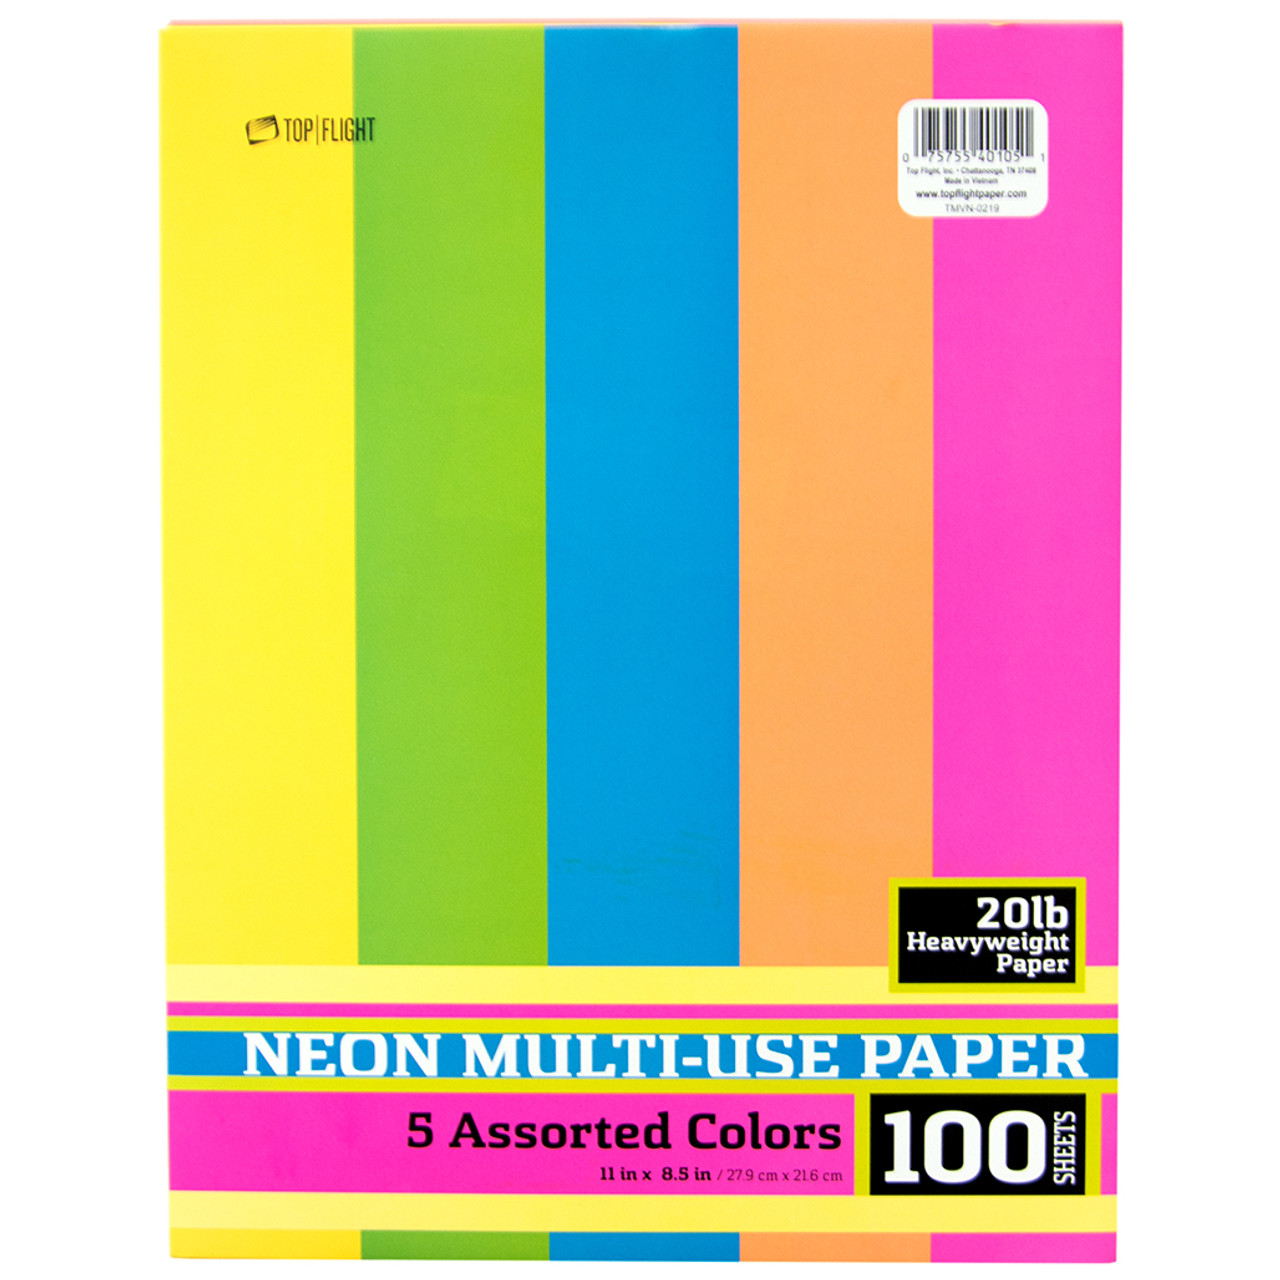 Multi-purpose Neon Heavyweight Paper, Assorted Colors, 8 1/2 x 11, 100  sheets